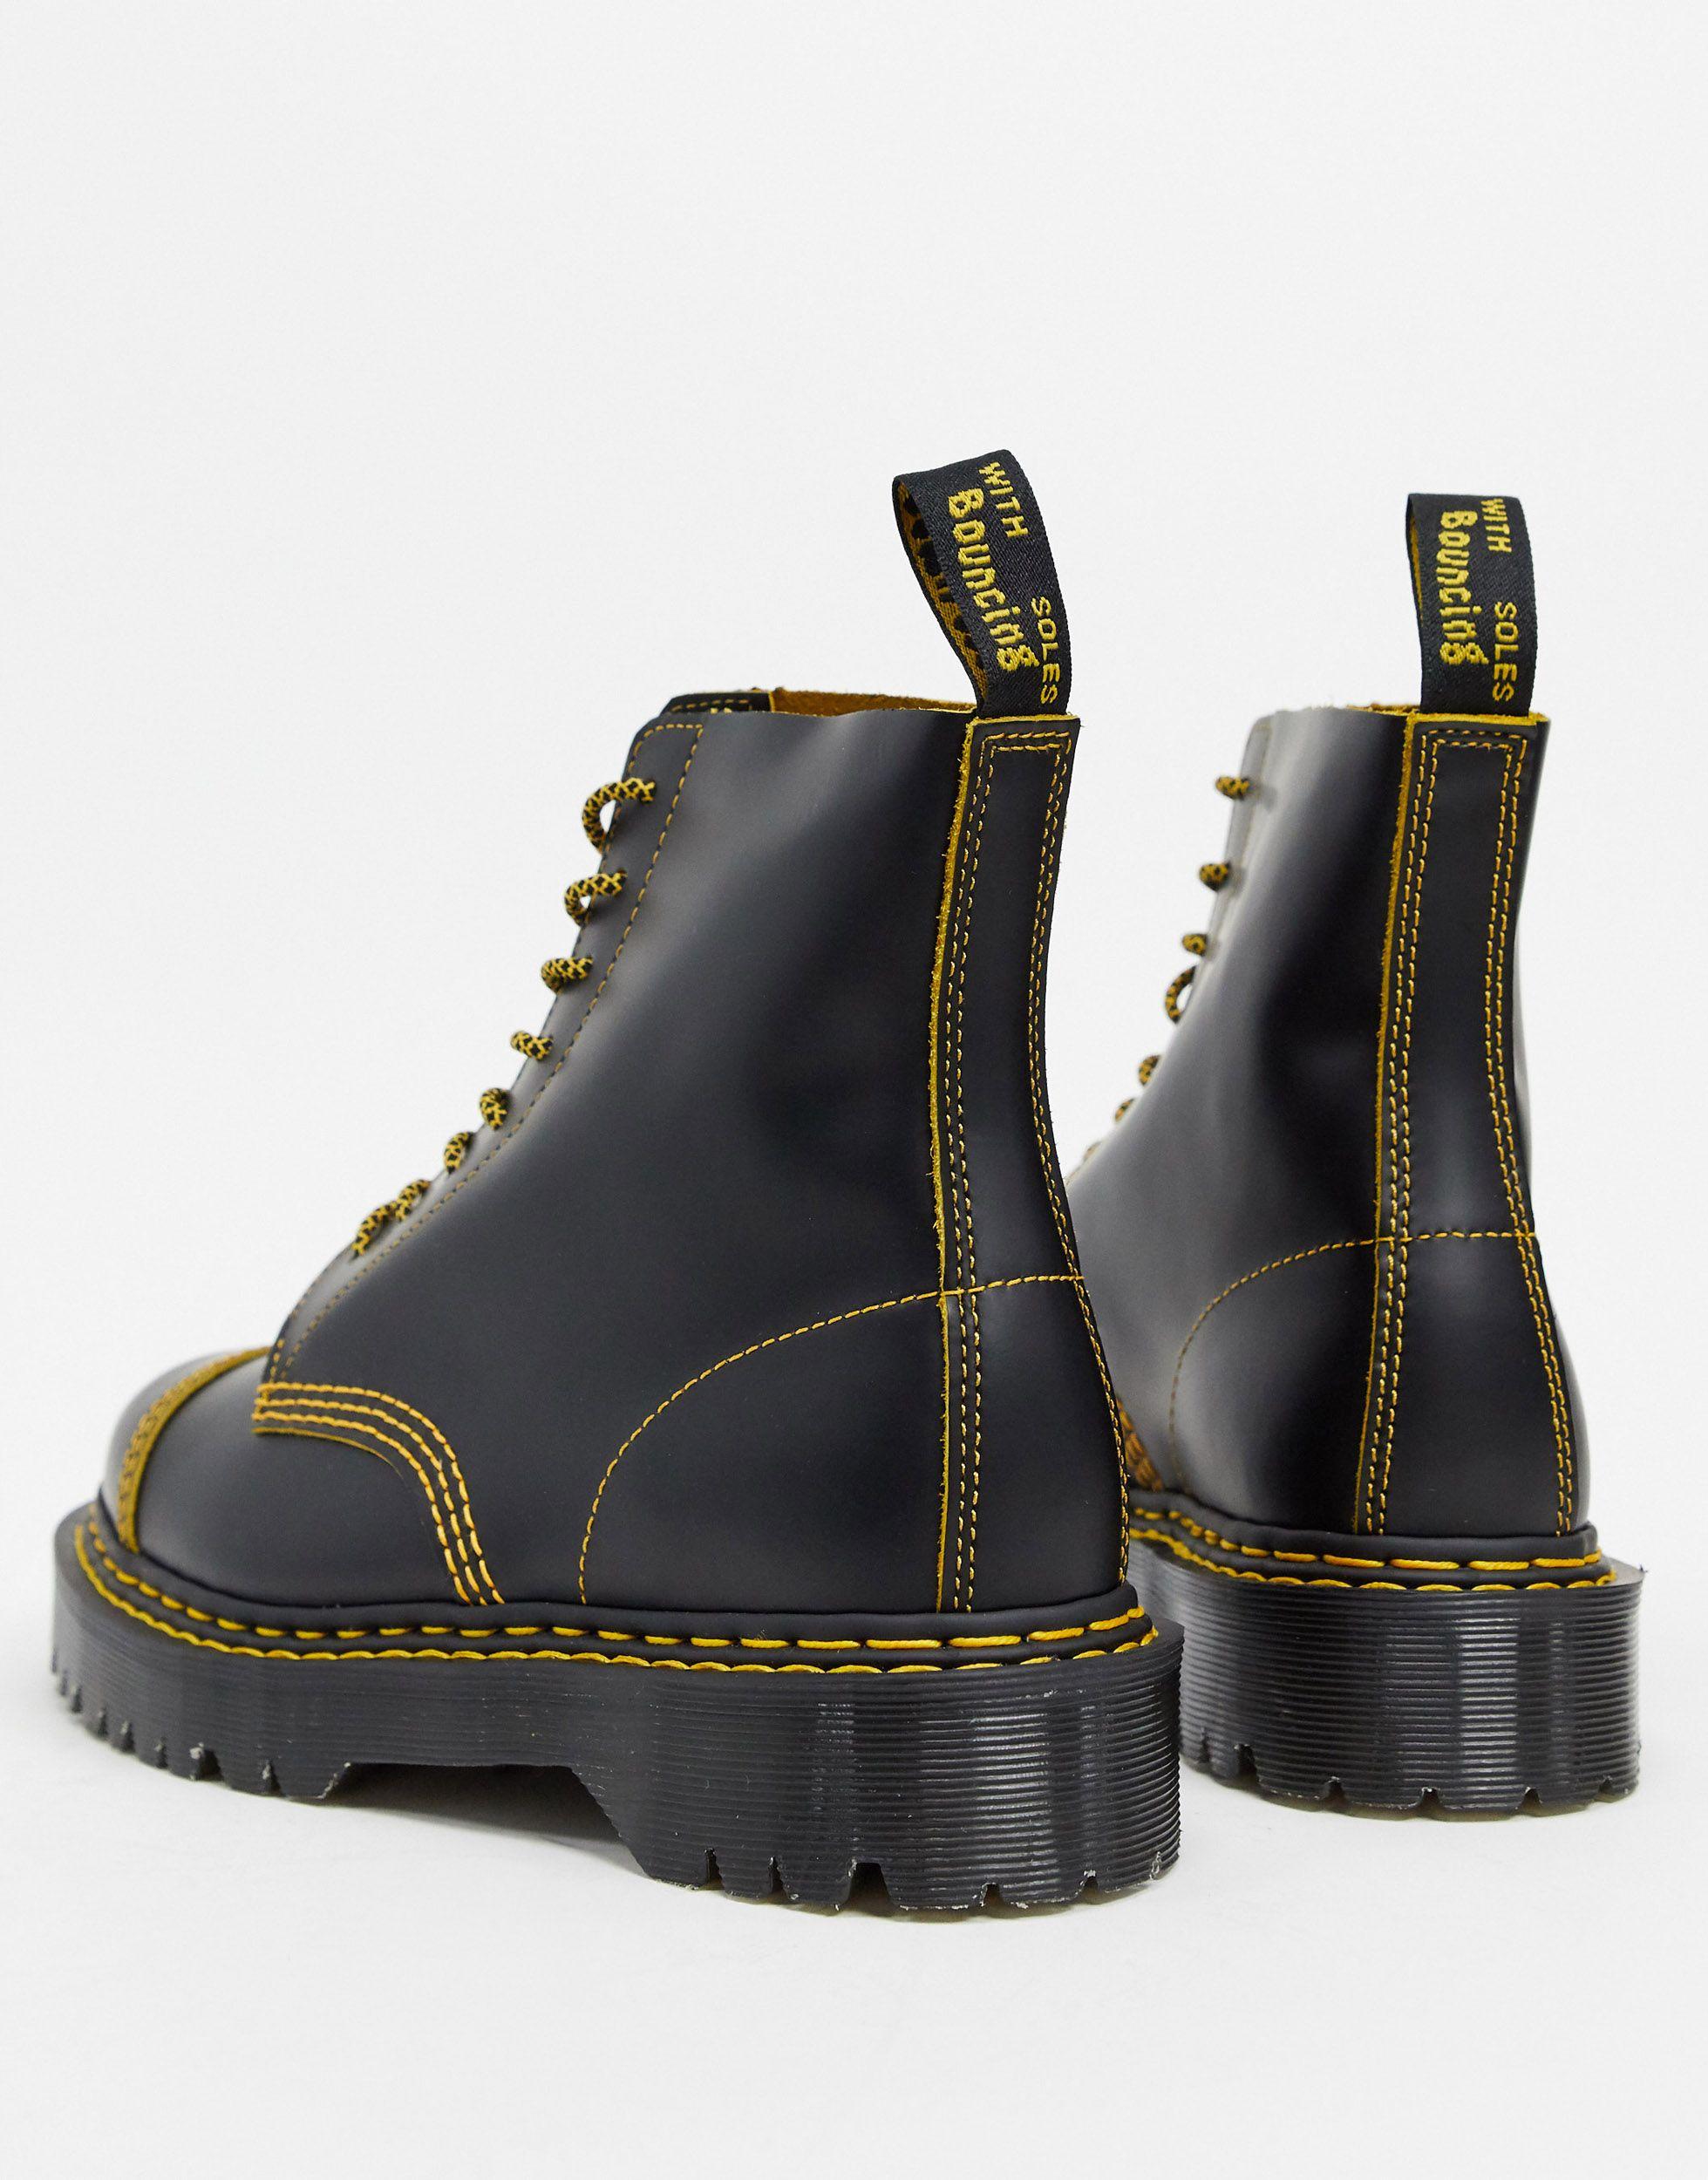 Buy > 1460 pascal double stitch leather boots > in stock